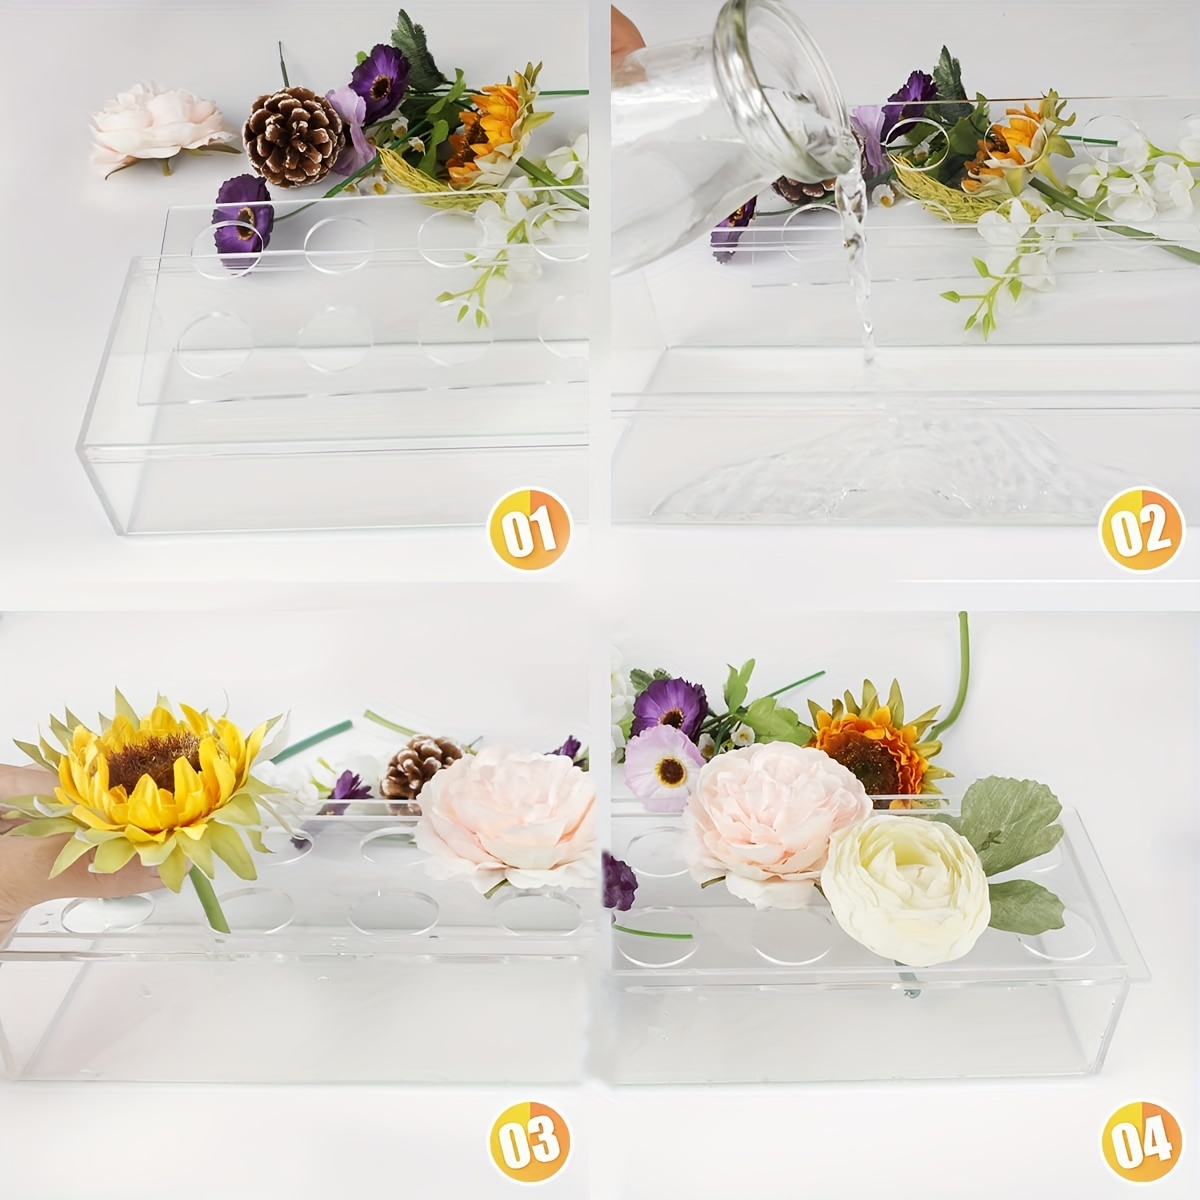 Clear Acrylic Flower Vase Rectangular Floral Centerpiece for Dining Table 16 inch Long Rectangle Decorative Modern Vase - Low Floral Vases for